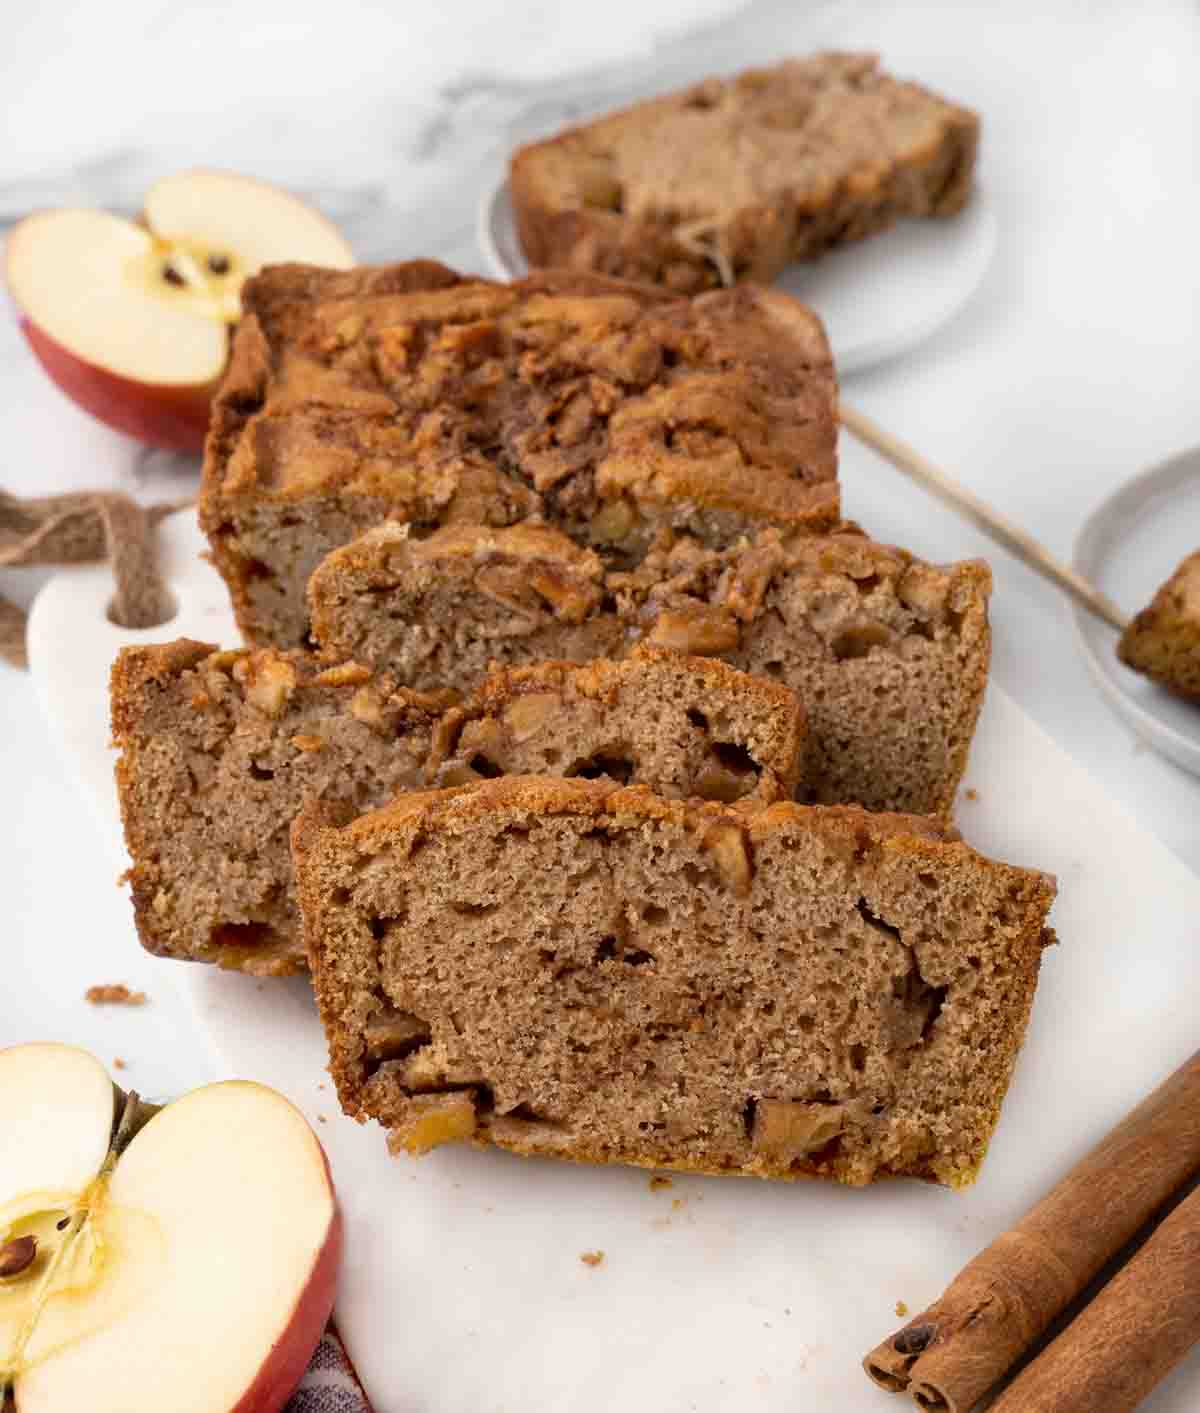 apple bread sliced with apples and cinnamon sticks on a white cutting board.